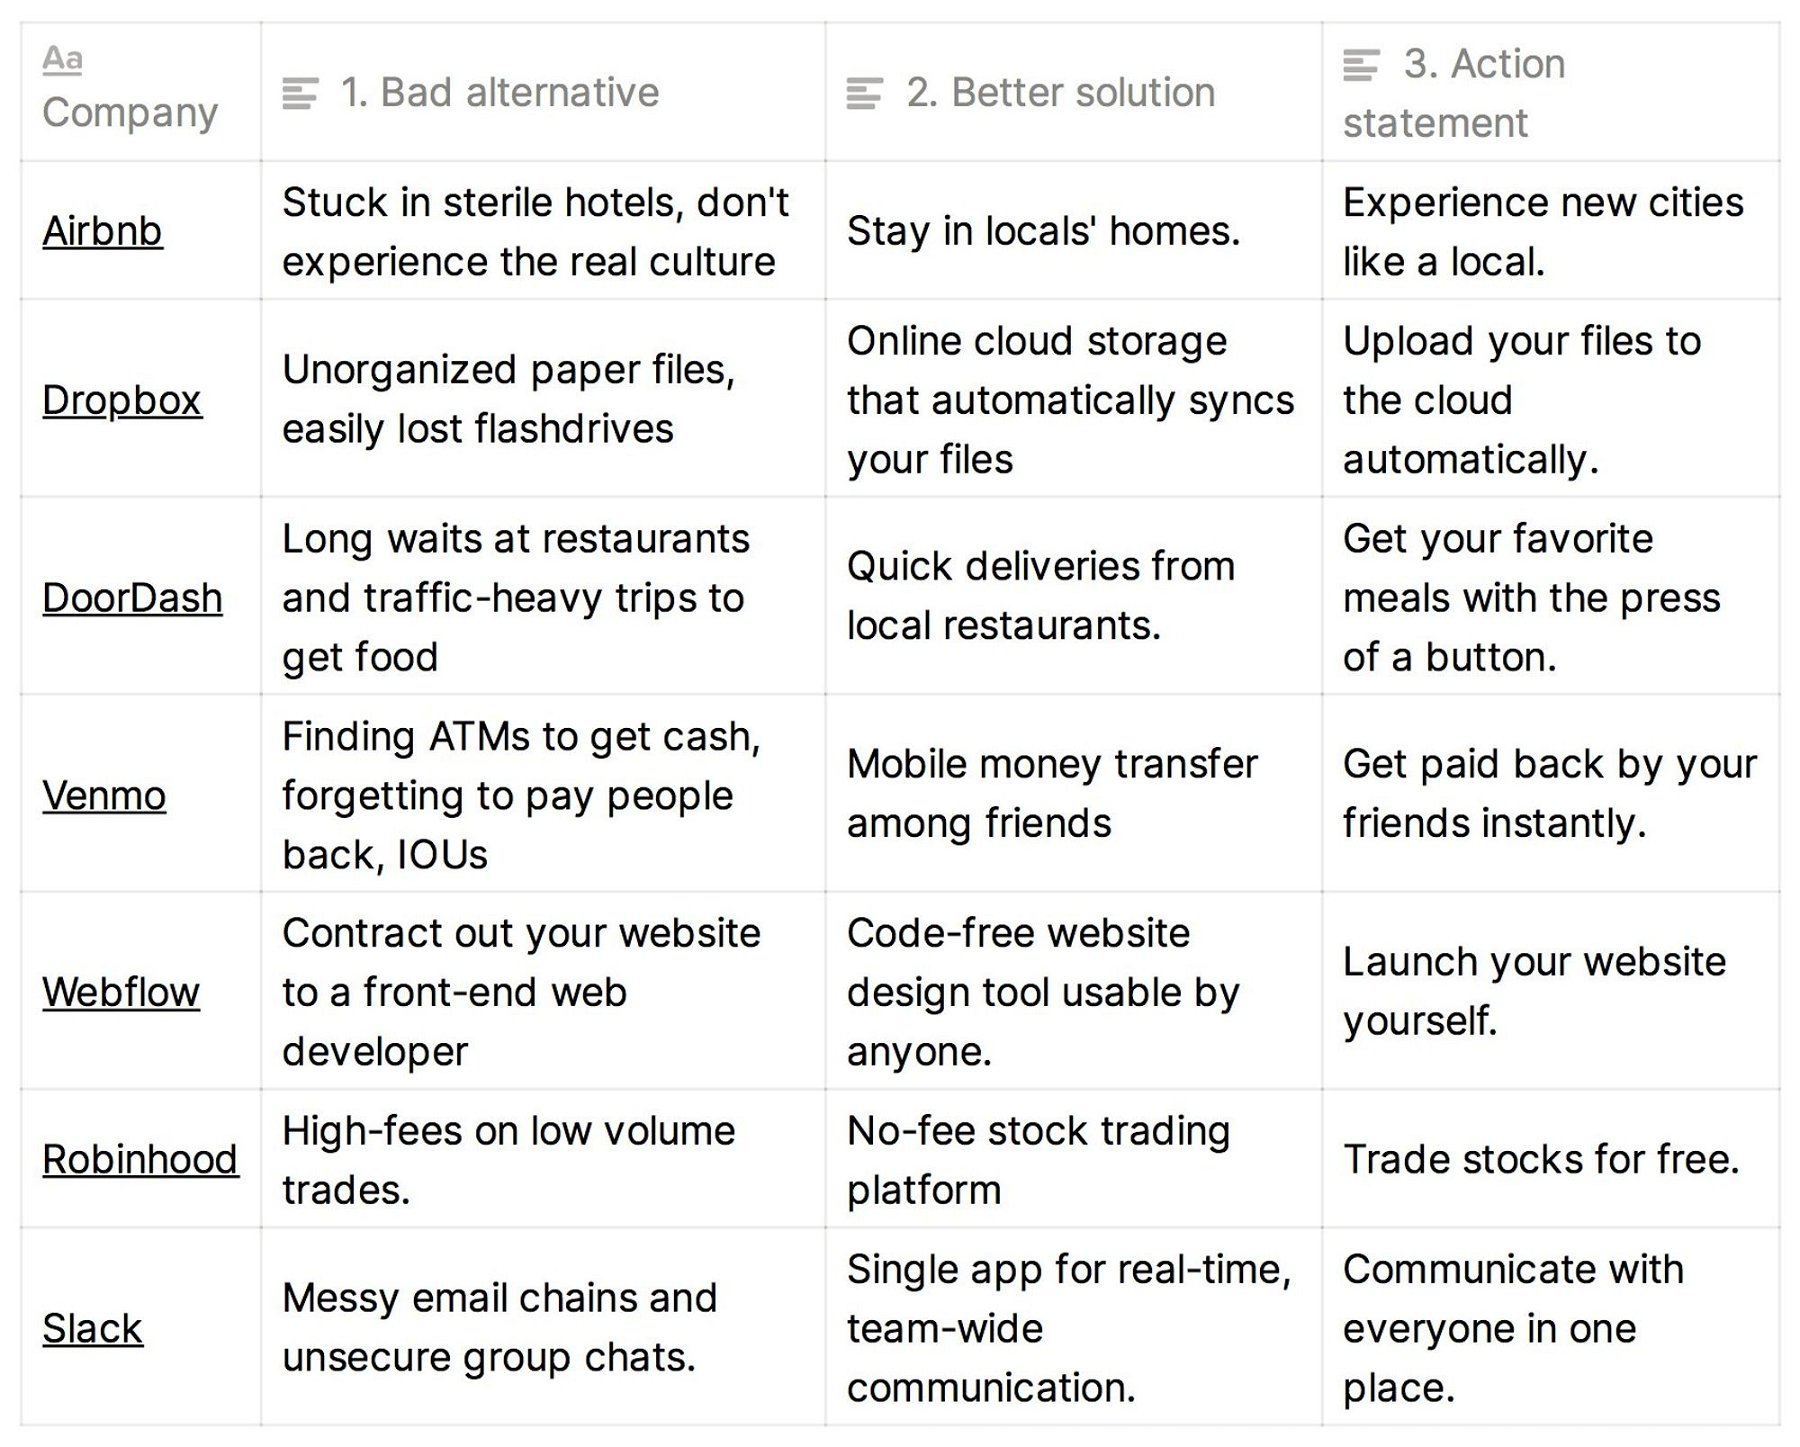 Copywriting examples from top SaaS startups.